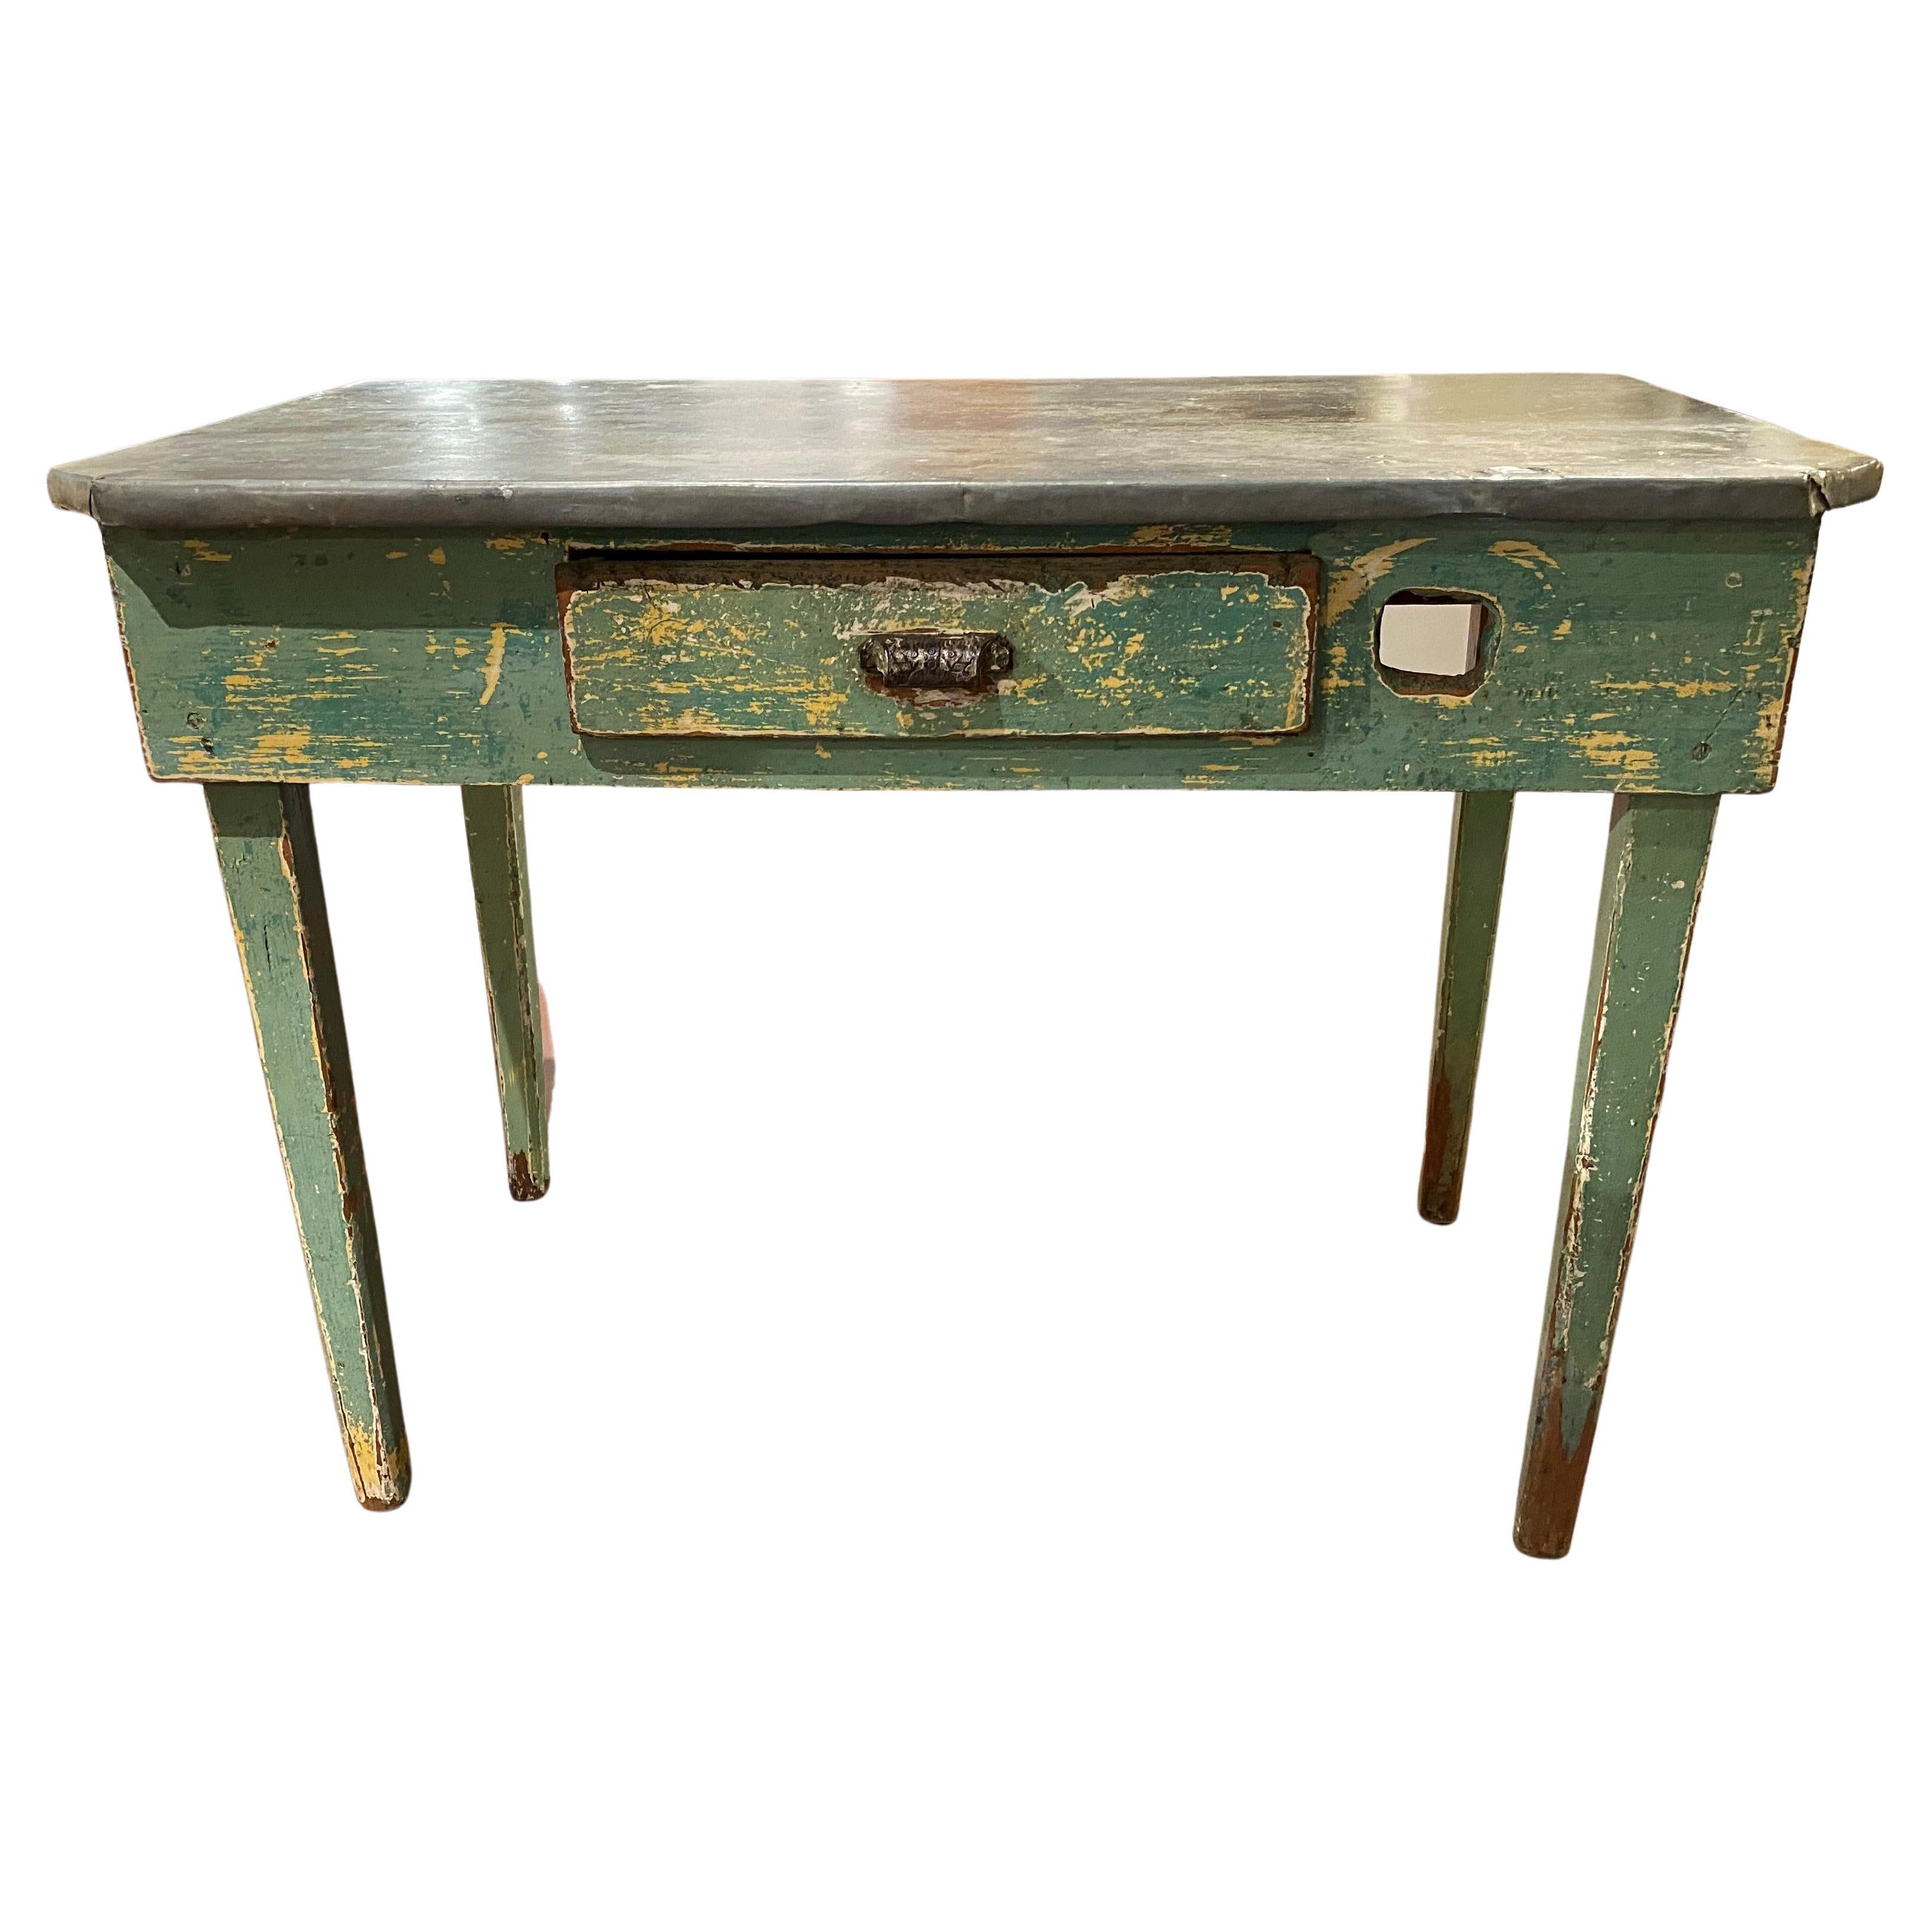 19th/20th Century Zinc Top Flower or Garden Table in Green Paint For Sale